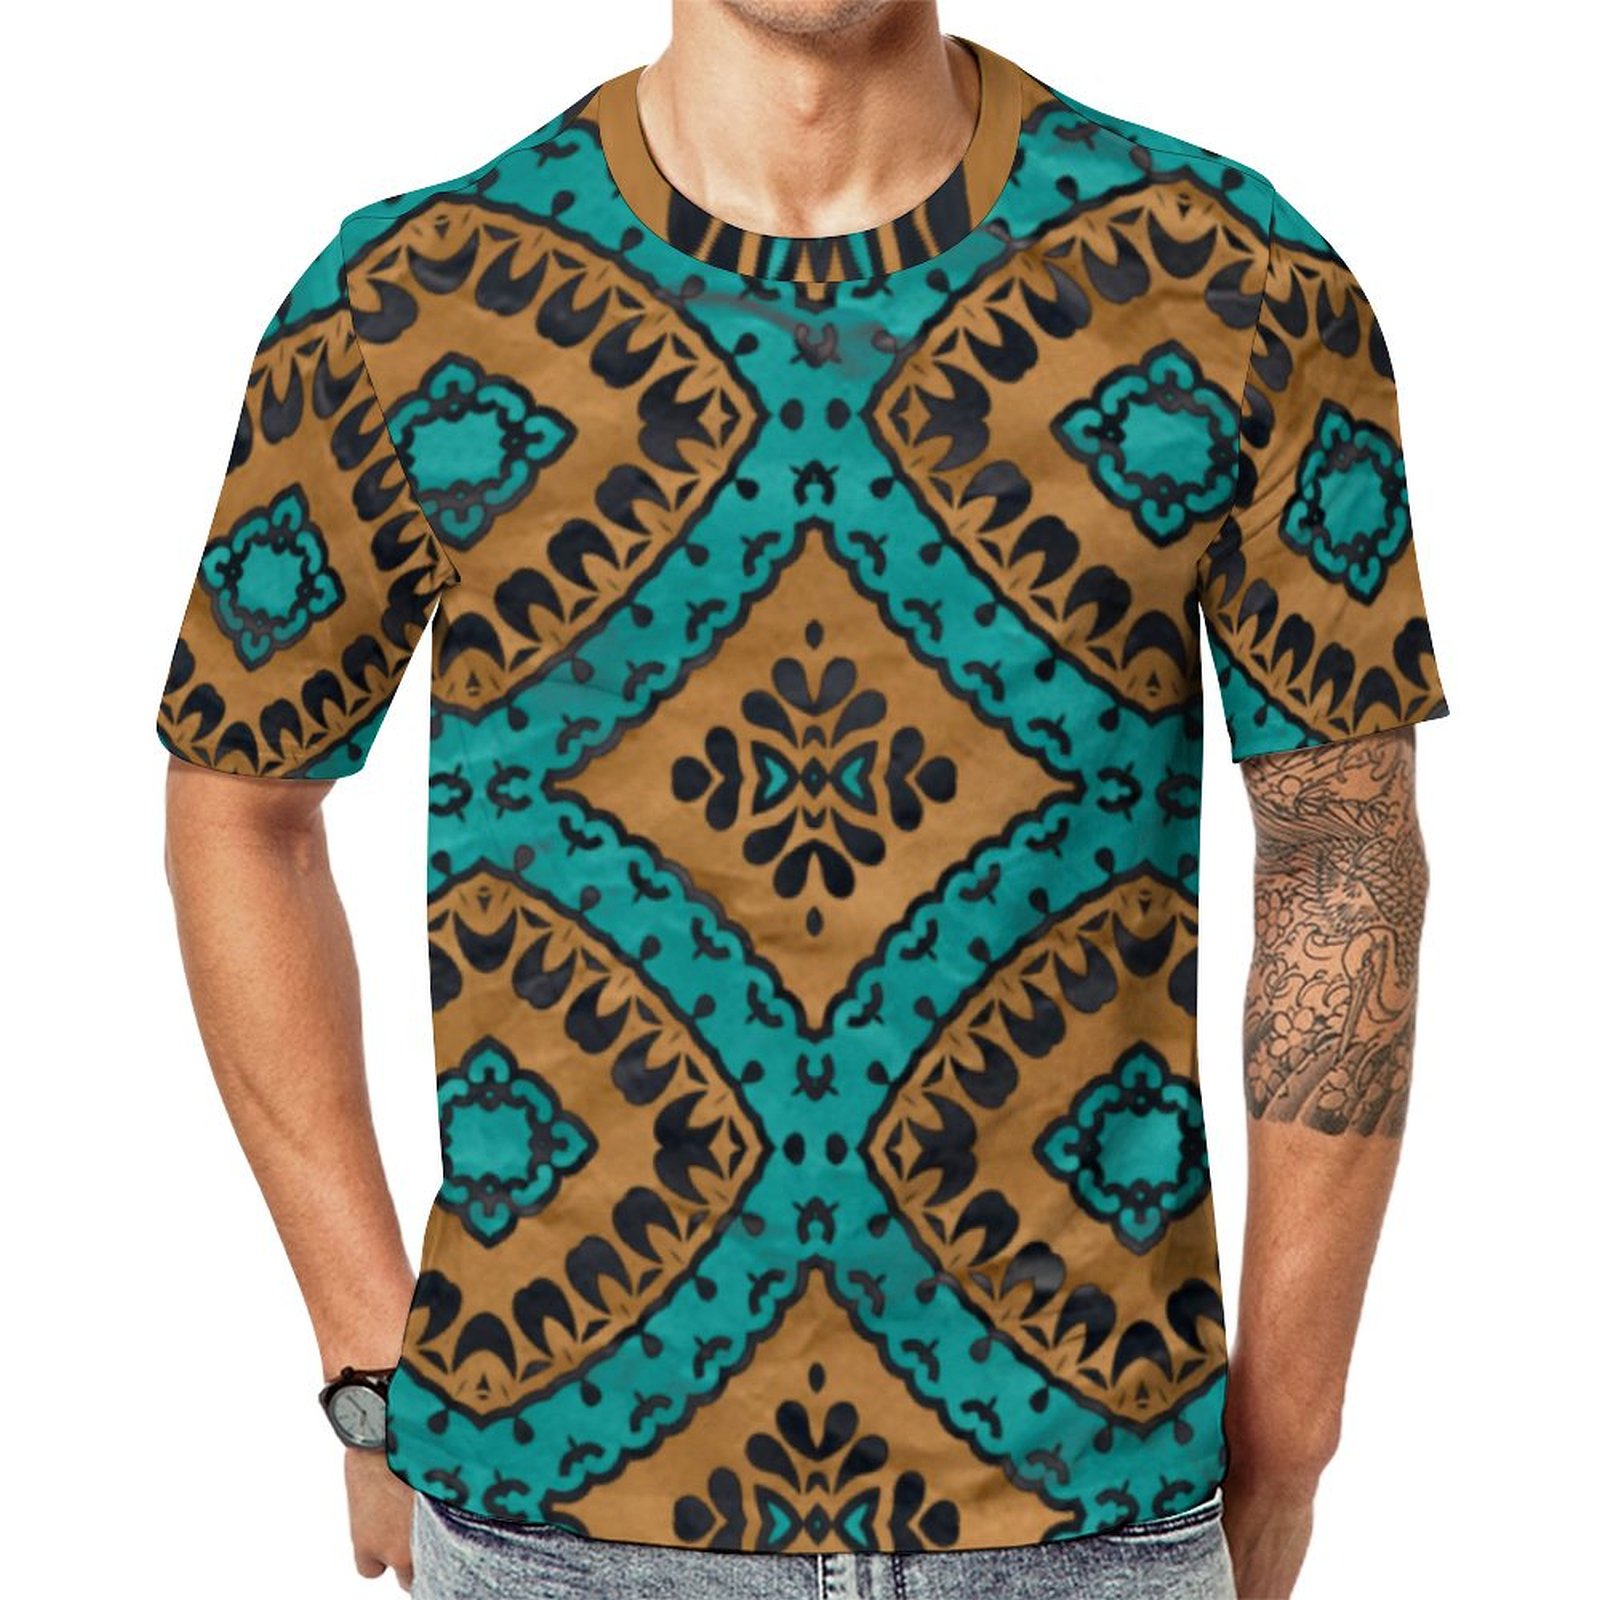 Boho Moroccan Turquoise And Bronze Short Sleeve Print Unisex Tshirt Summer Casual Tees for Men and Women Coolcoshirts